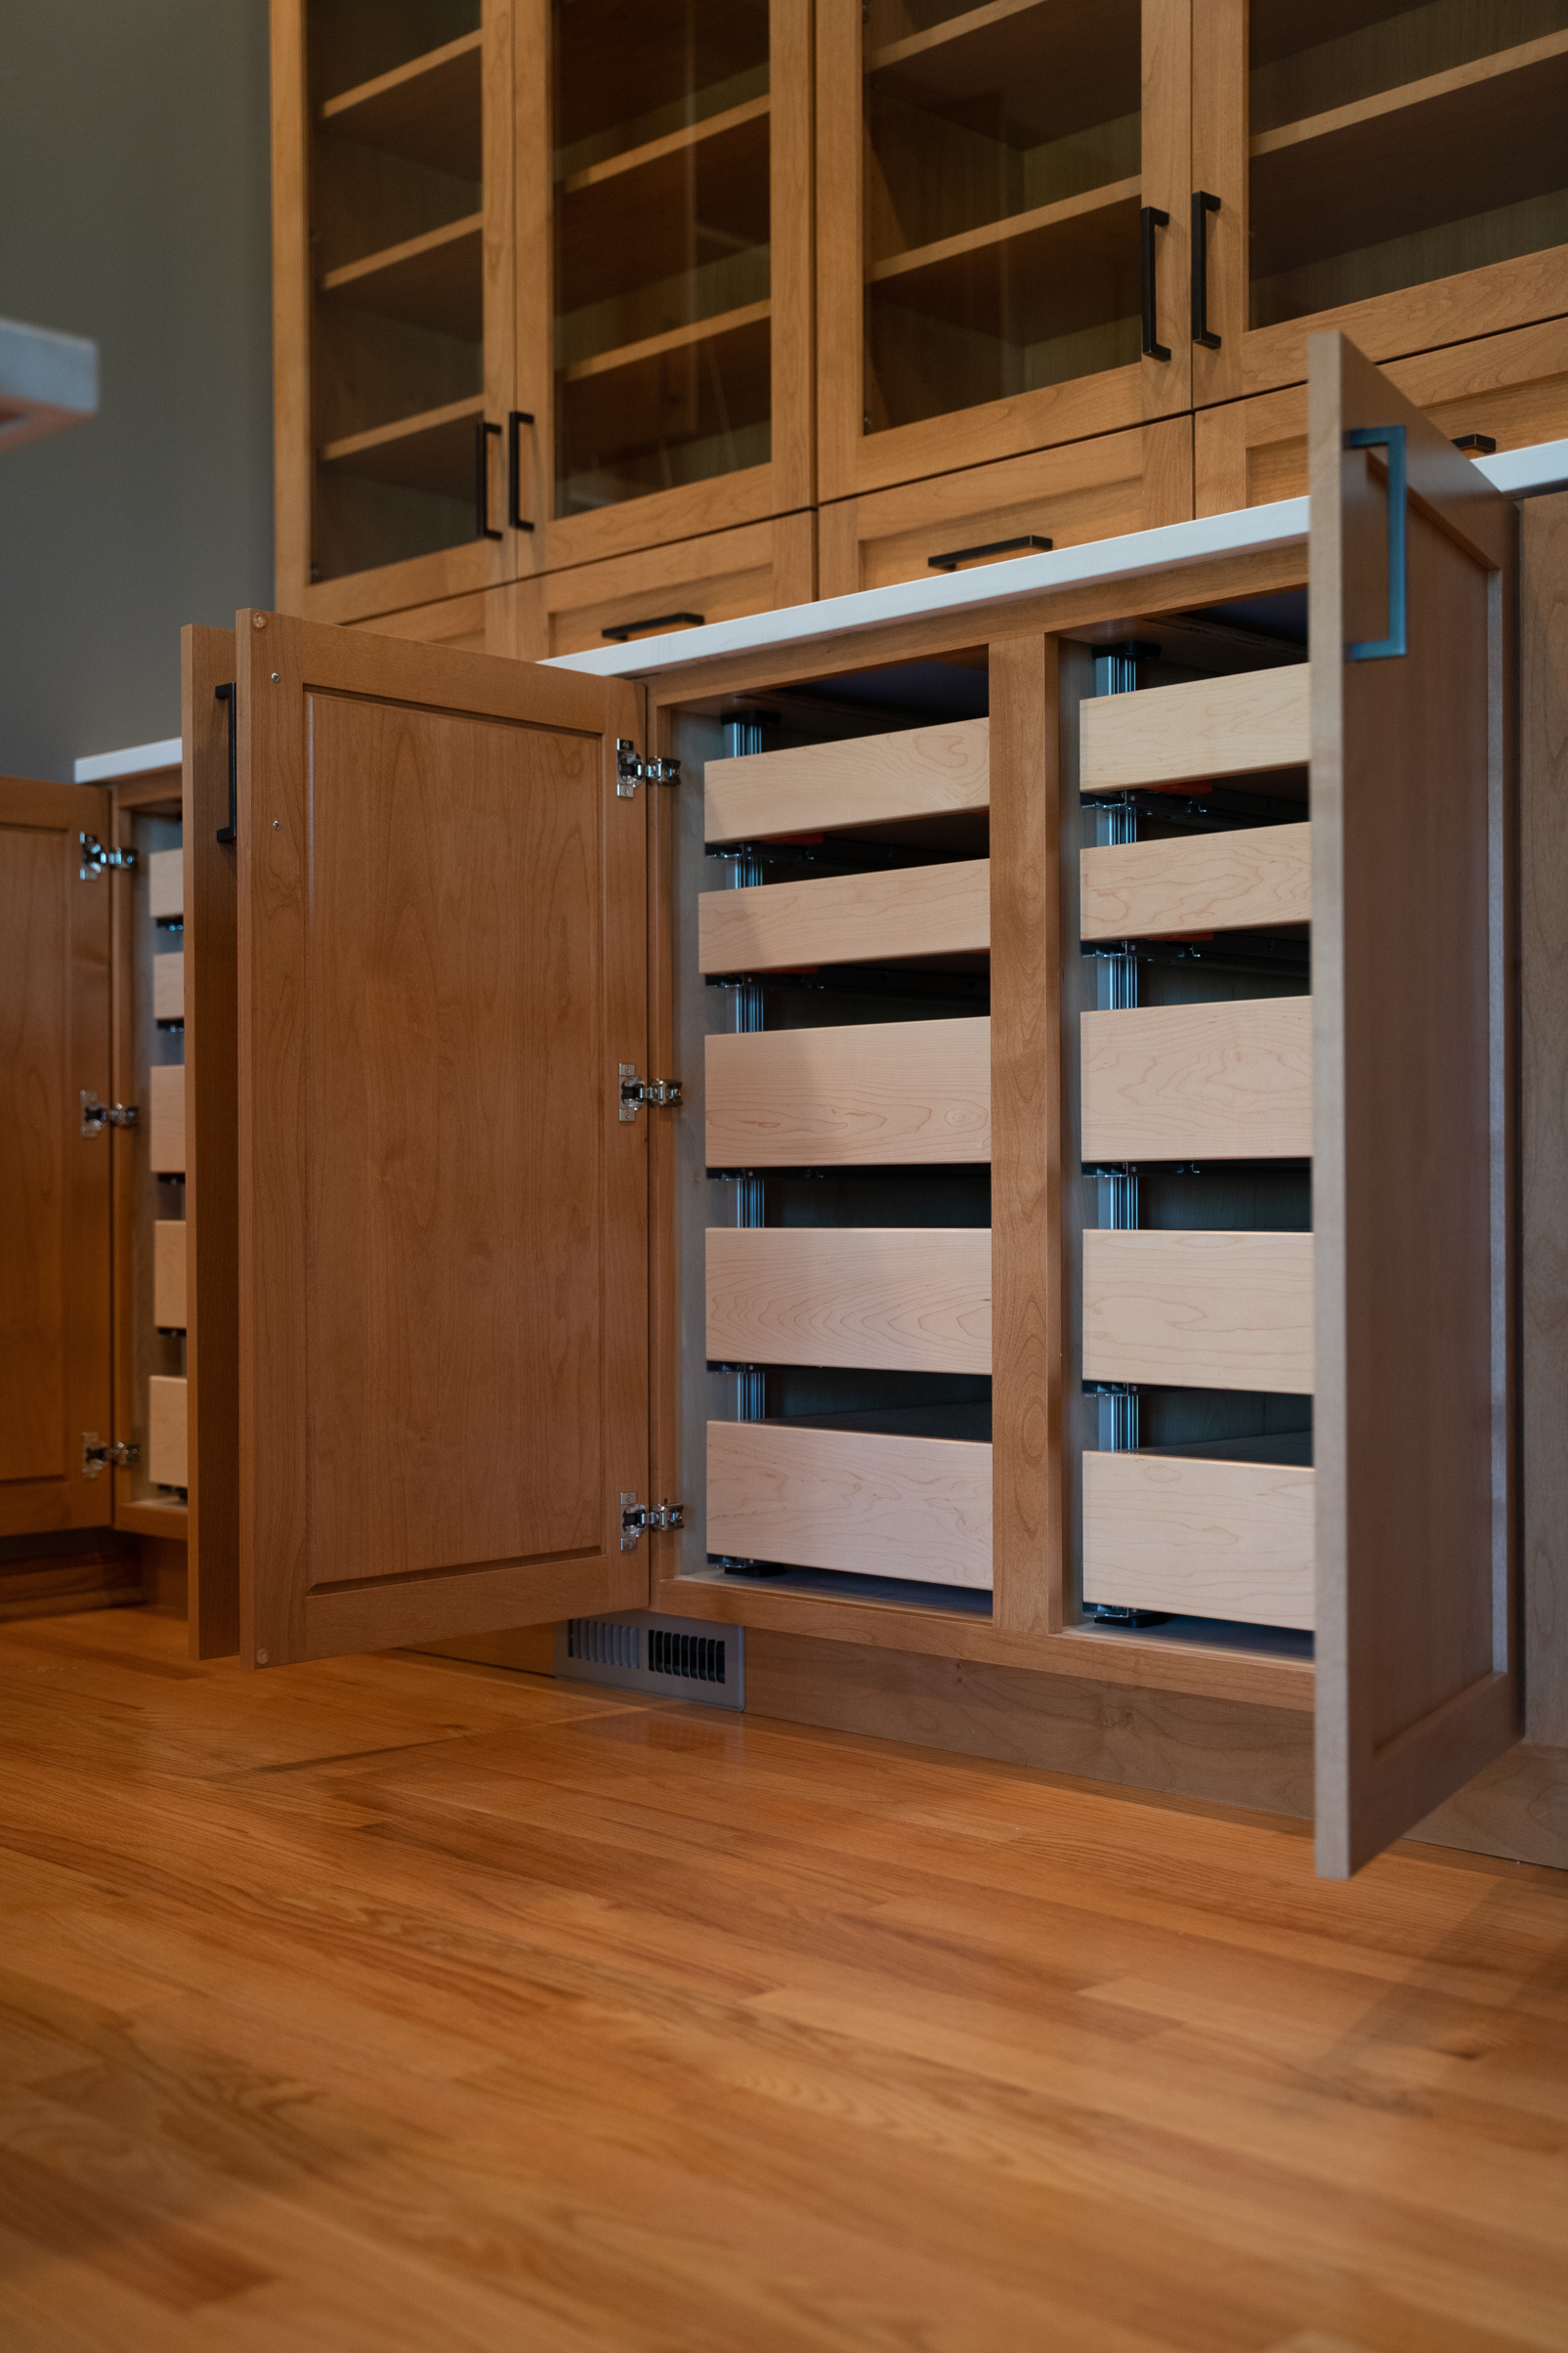 Large floor to ceiling cabinets that open to pull out shelves